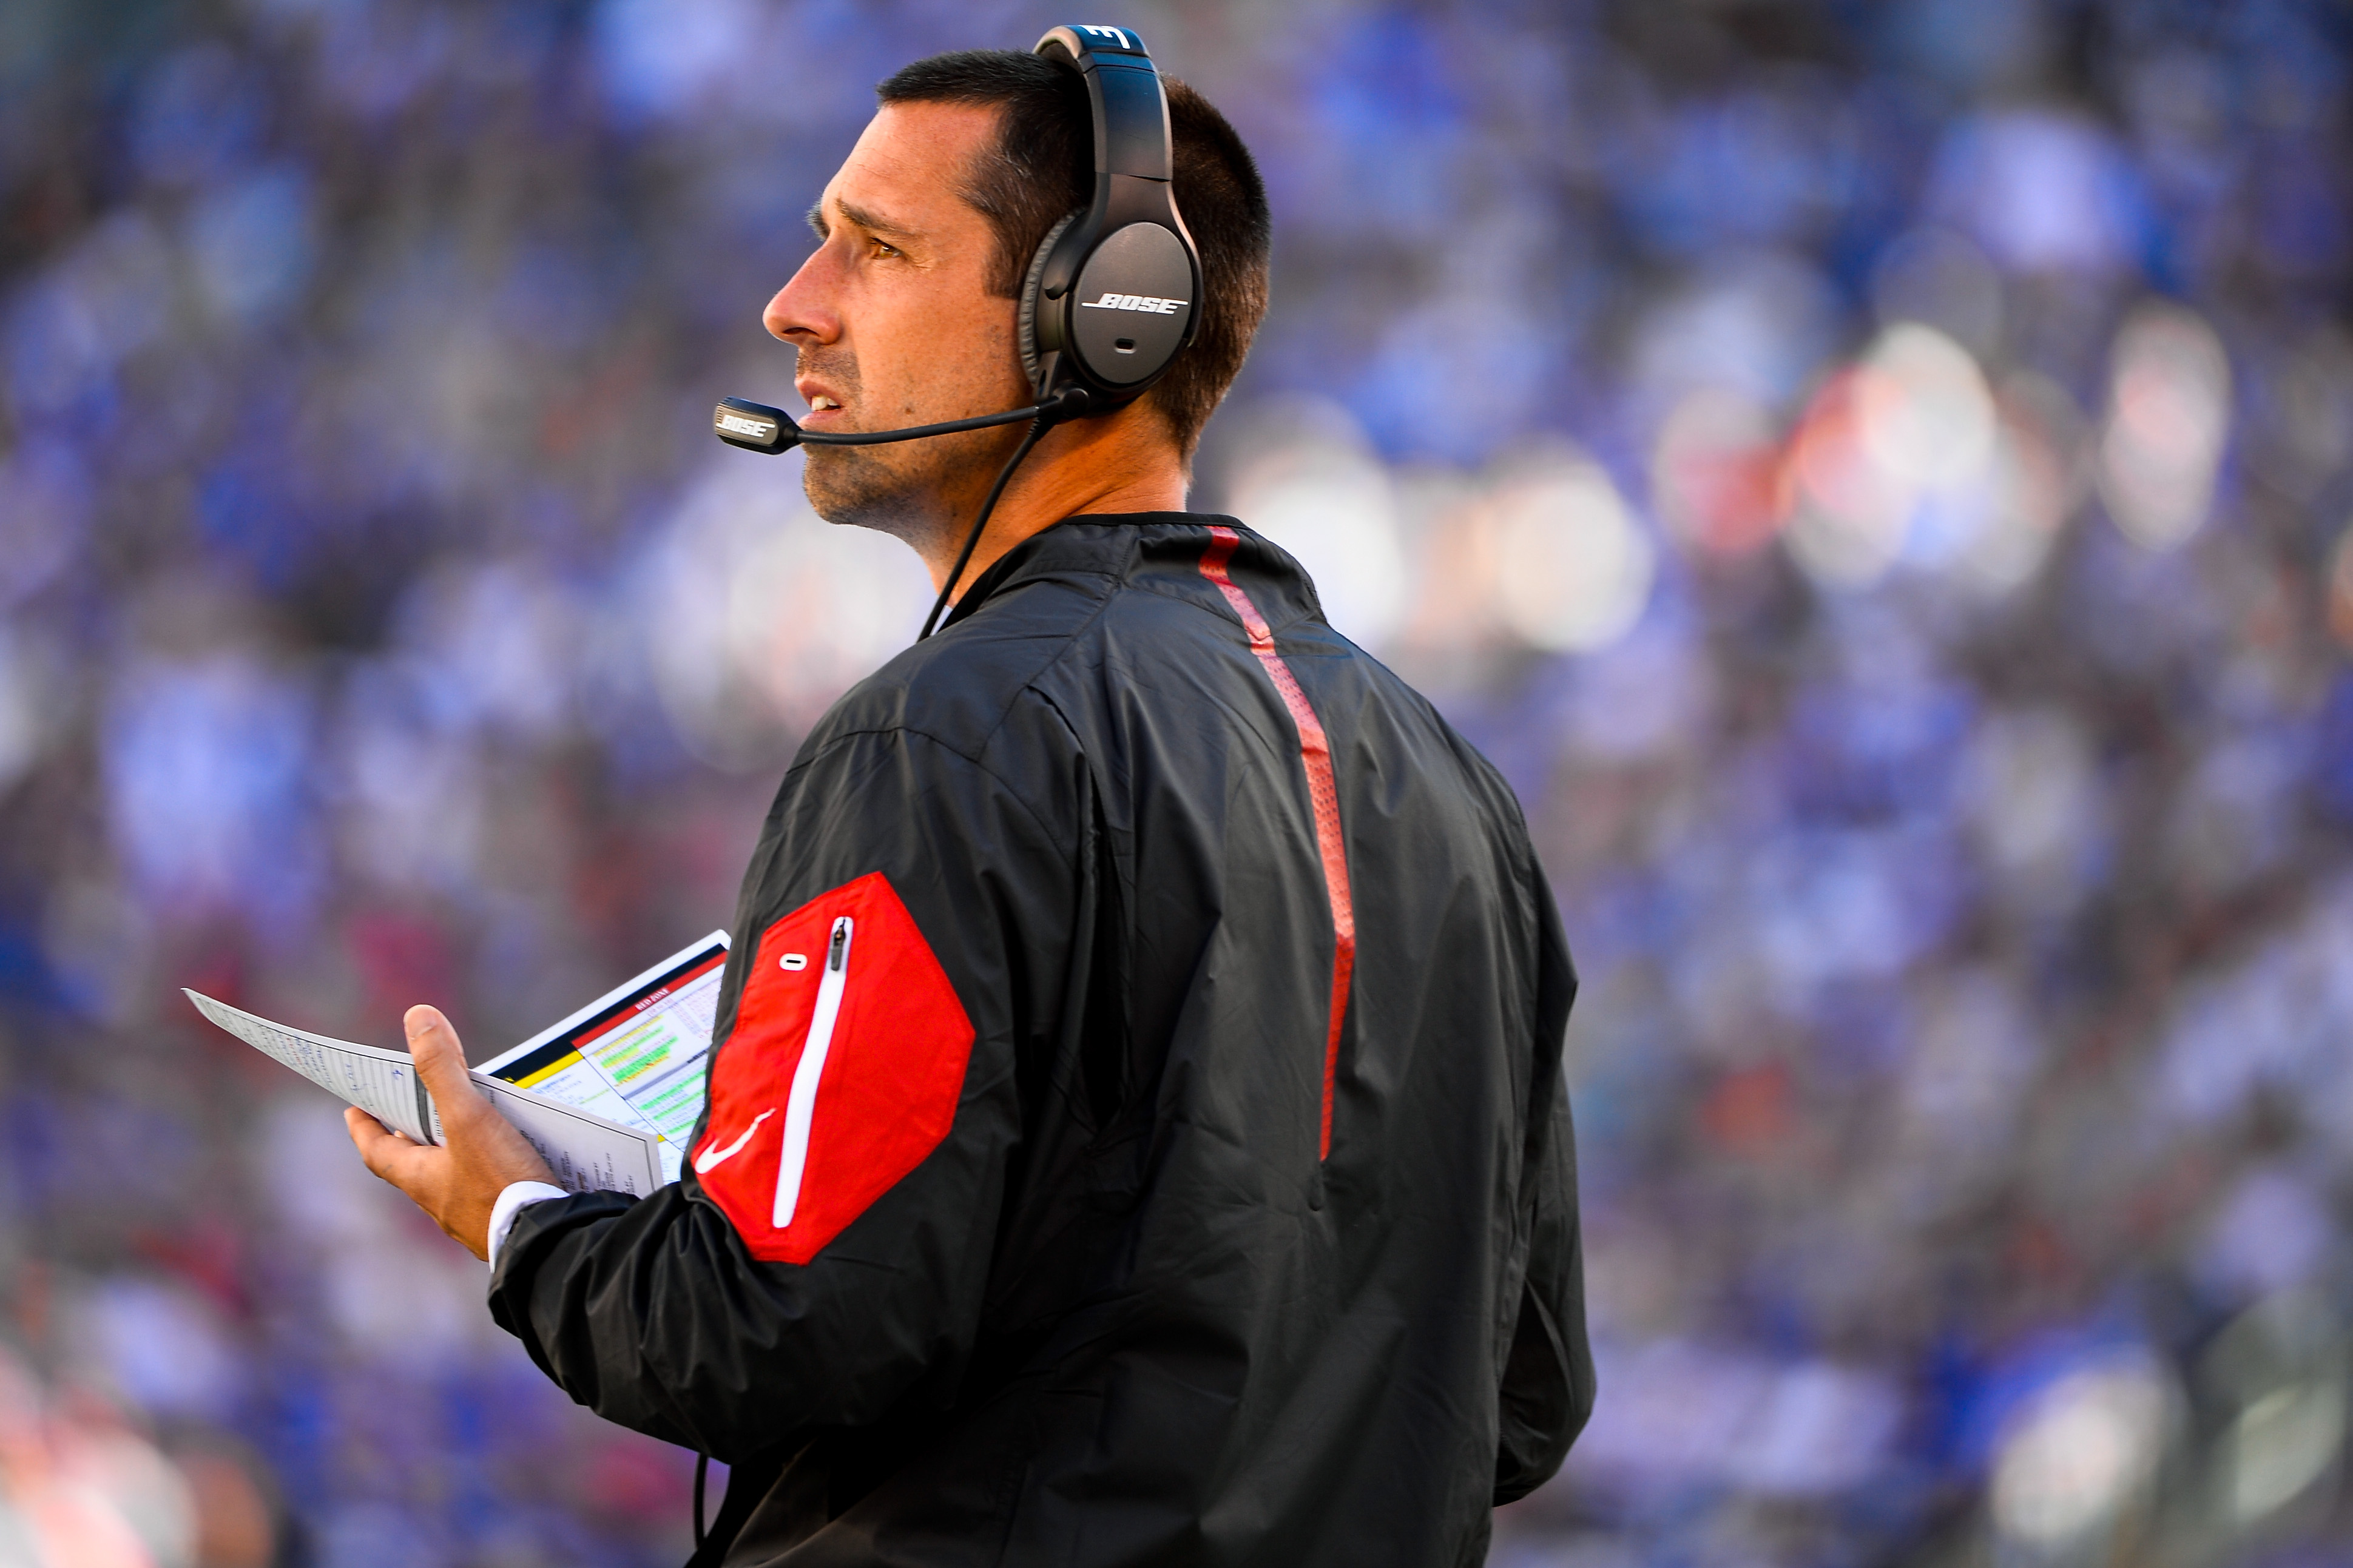 EAST RUTHERFORD, NJ - SEPTEMBER 20: Atlanta Falcons offensive coordinator Kyle Shanahan looks on during a game against the New York Giants at MetLife Stadium on September 20, 2015 in East Rutherford, New Jersey.  (Photo by Alex Goodlett/Getty Images)